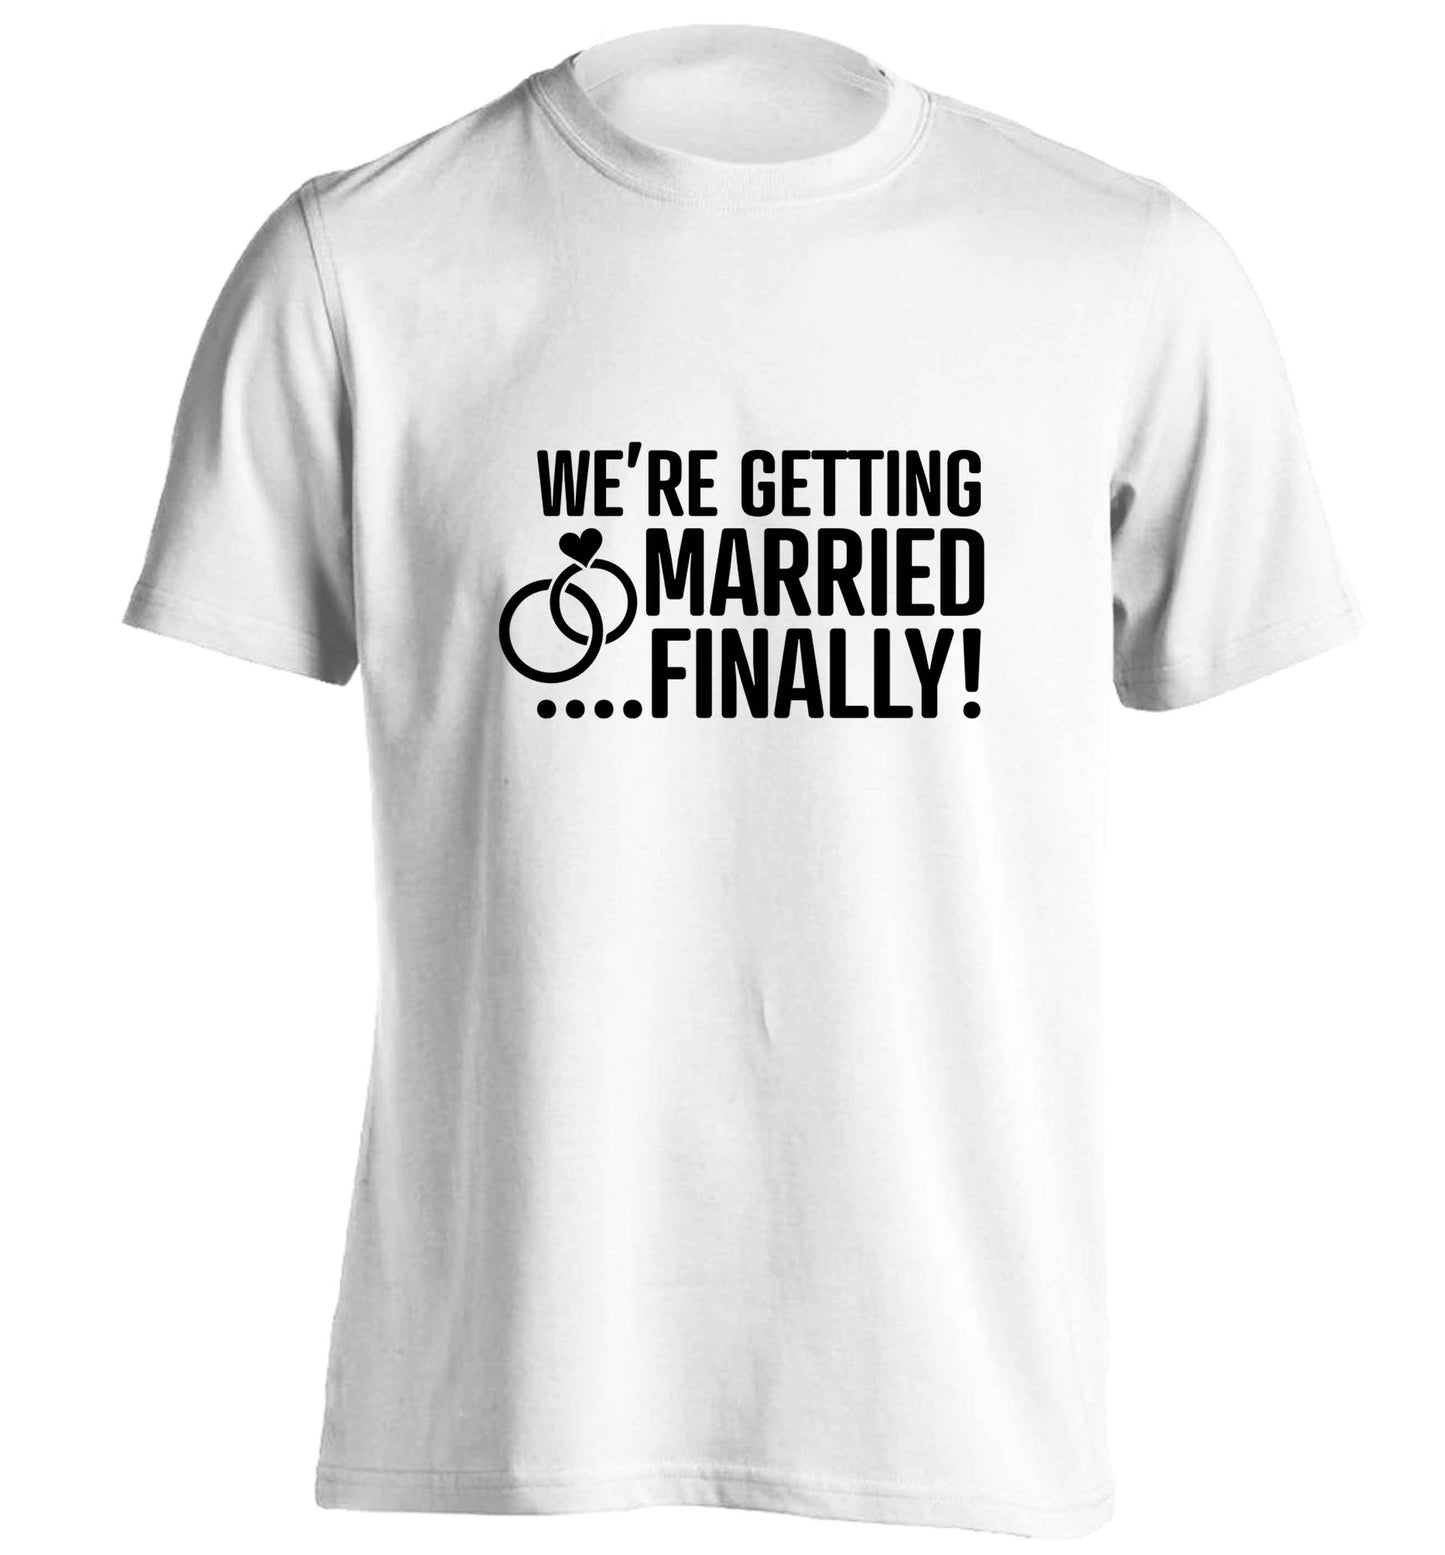 It's been a long wait but it's finally happening! Let everyone know you're celebrating your big day soon! adults unisex white Tshirt 2XL